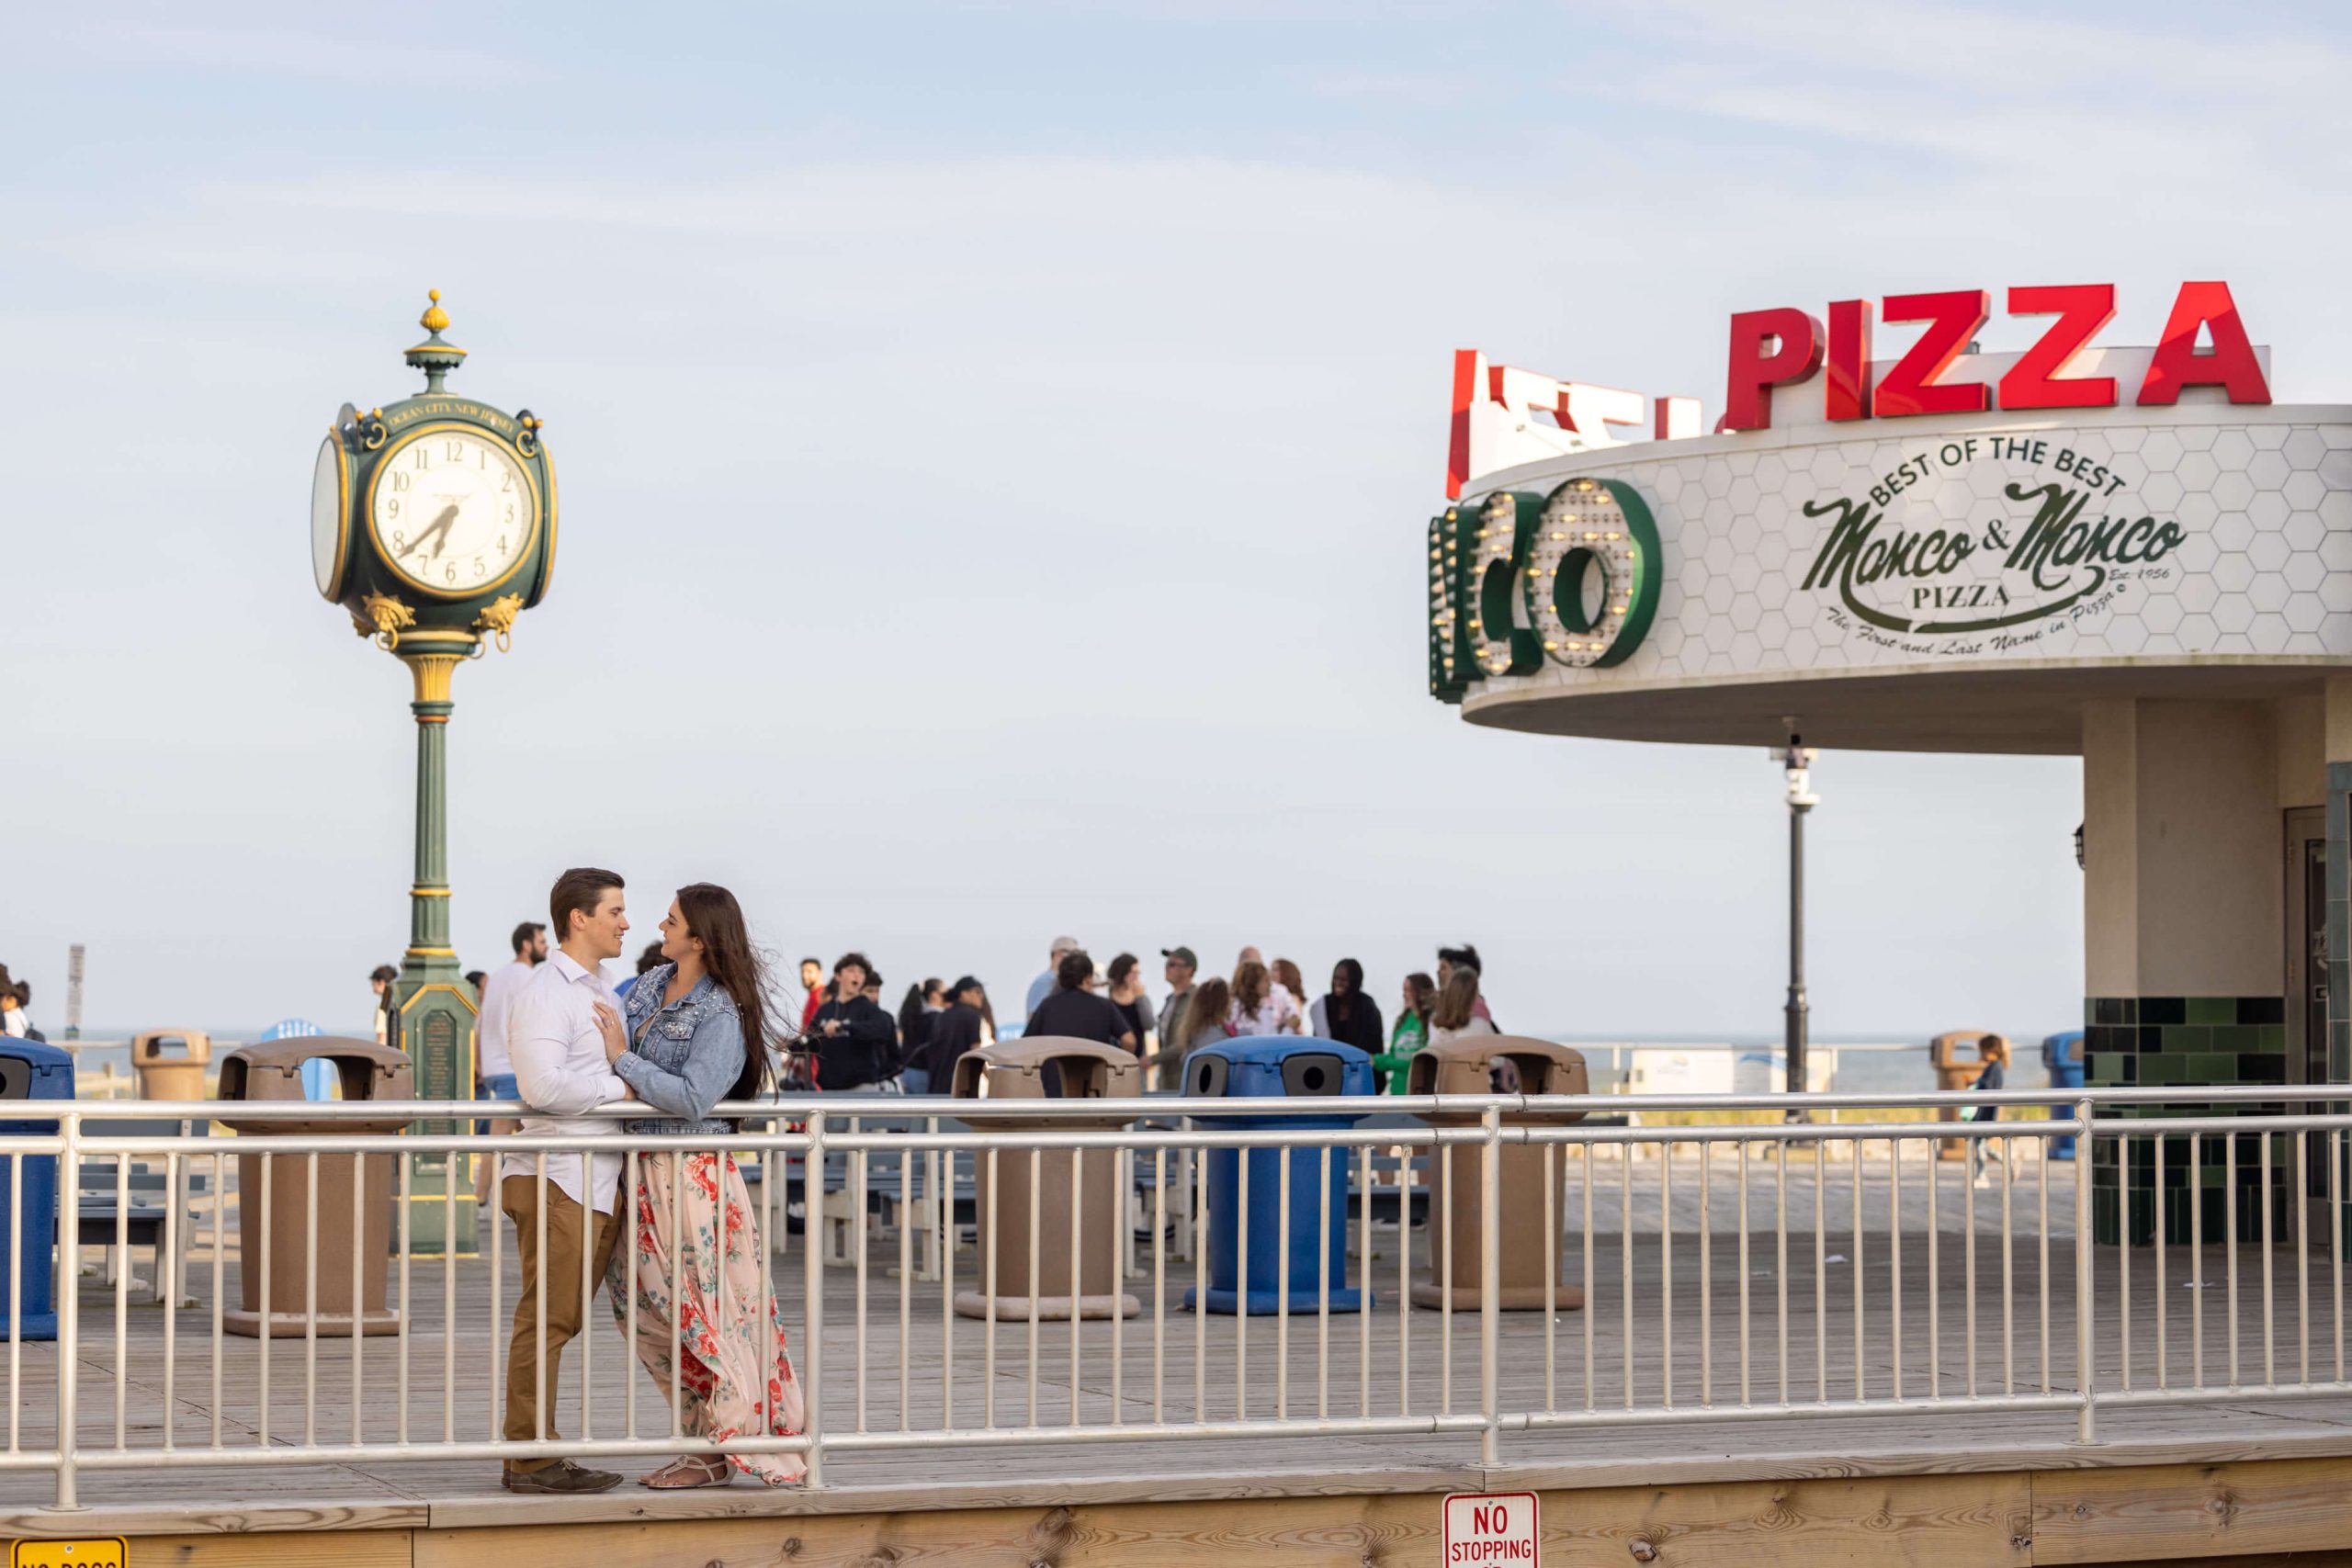 couple at boardwalk by manco and manco pizza